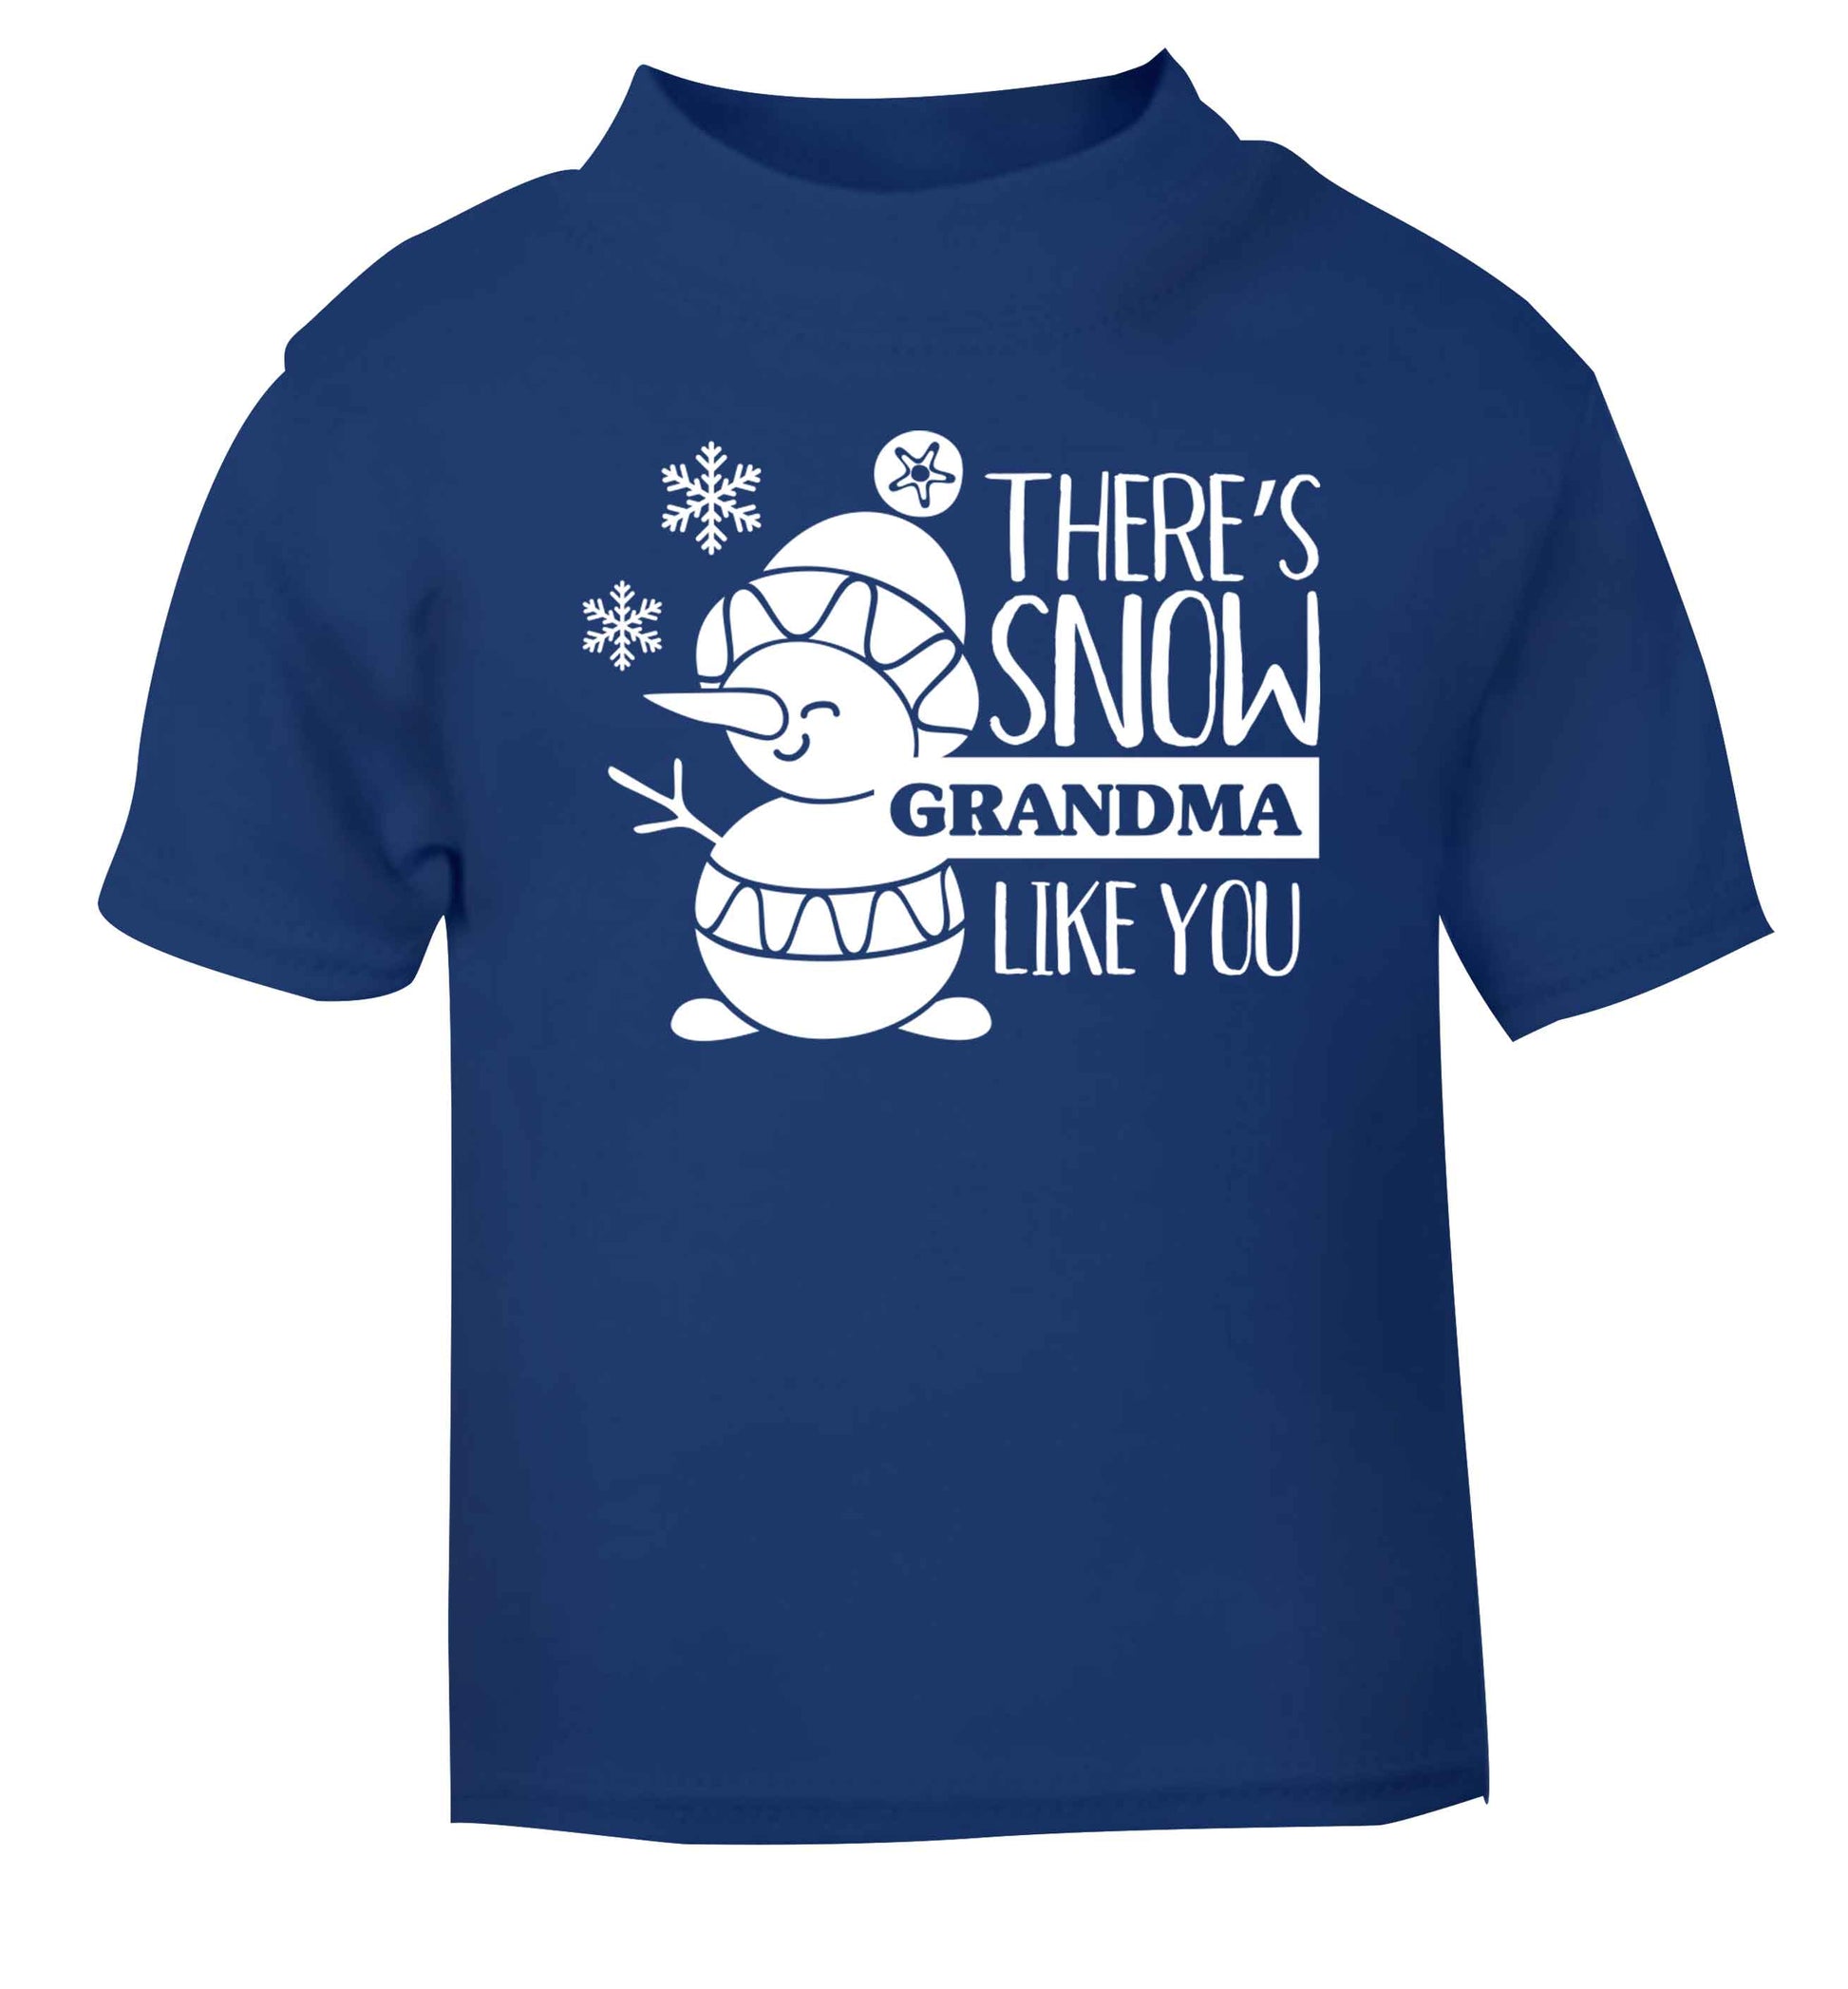 There's snow grandma like you blue baby toddler Tshirt 2 Years